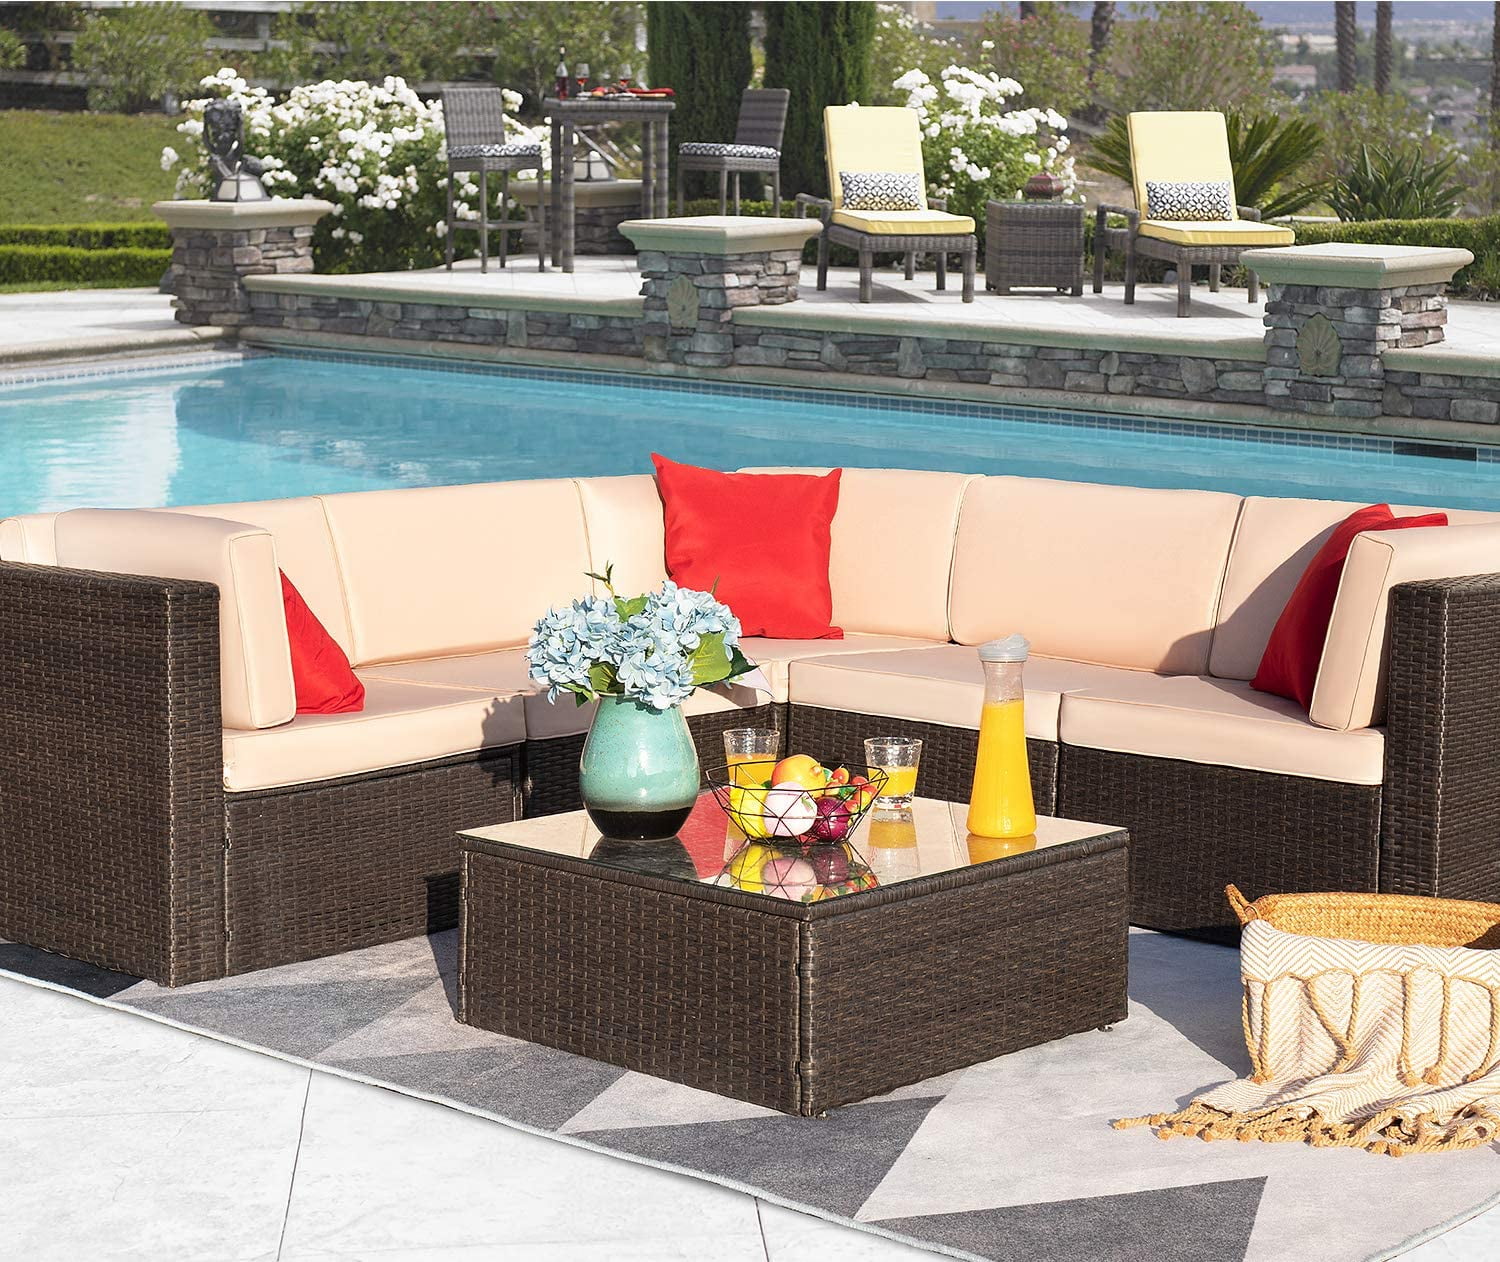 Valita Patio PE Wicker Furniture Set 6 Pieces Outdoor Brown Rattan Sectional Conversation Sofa Chair with Storage Table and Red Cushions